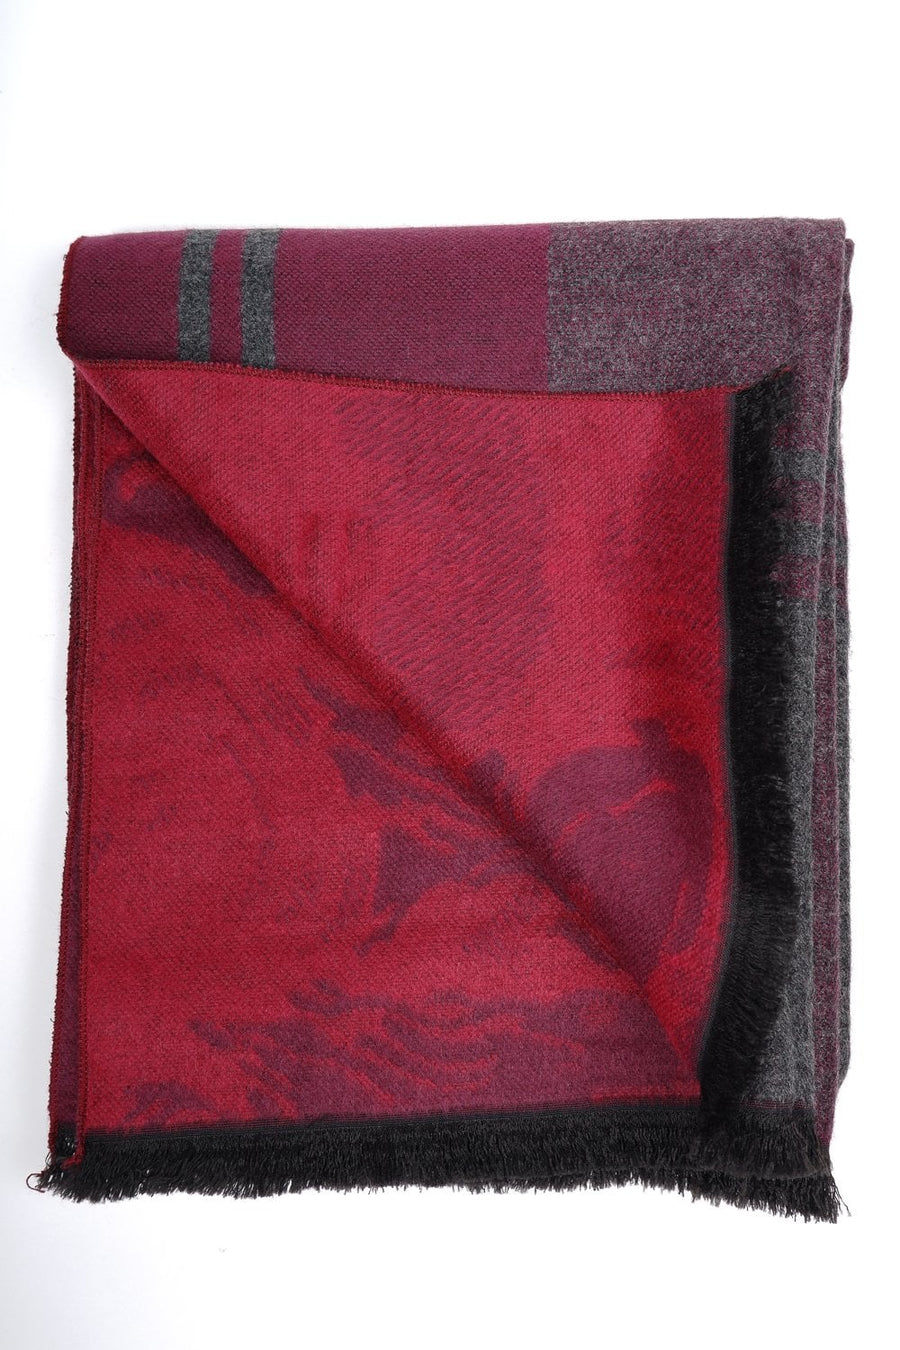 Buy the Remus Uomo Male Scarf Purple at Intro. Spend £50 for free UK delivery. Official stockists. We ship worldwide.